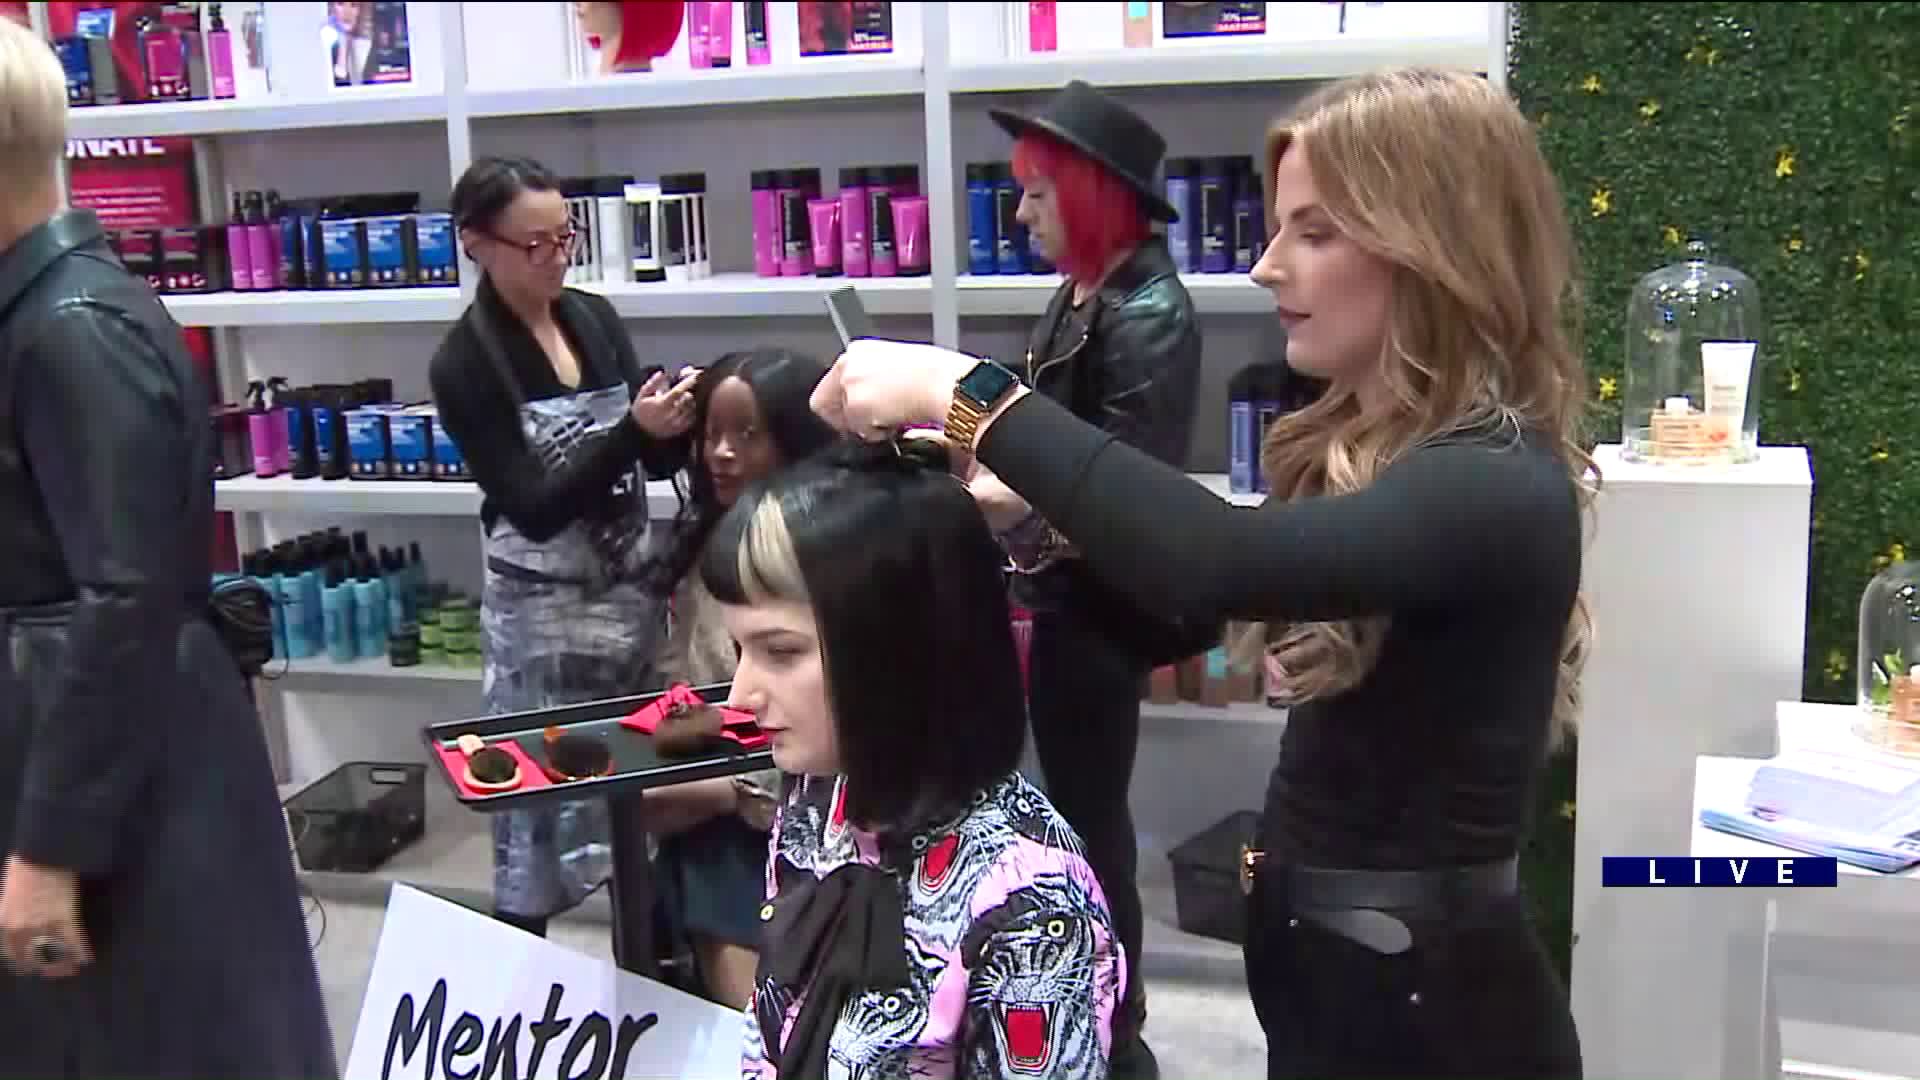 Around Town visits America’s Beauty Show